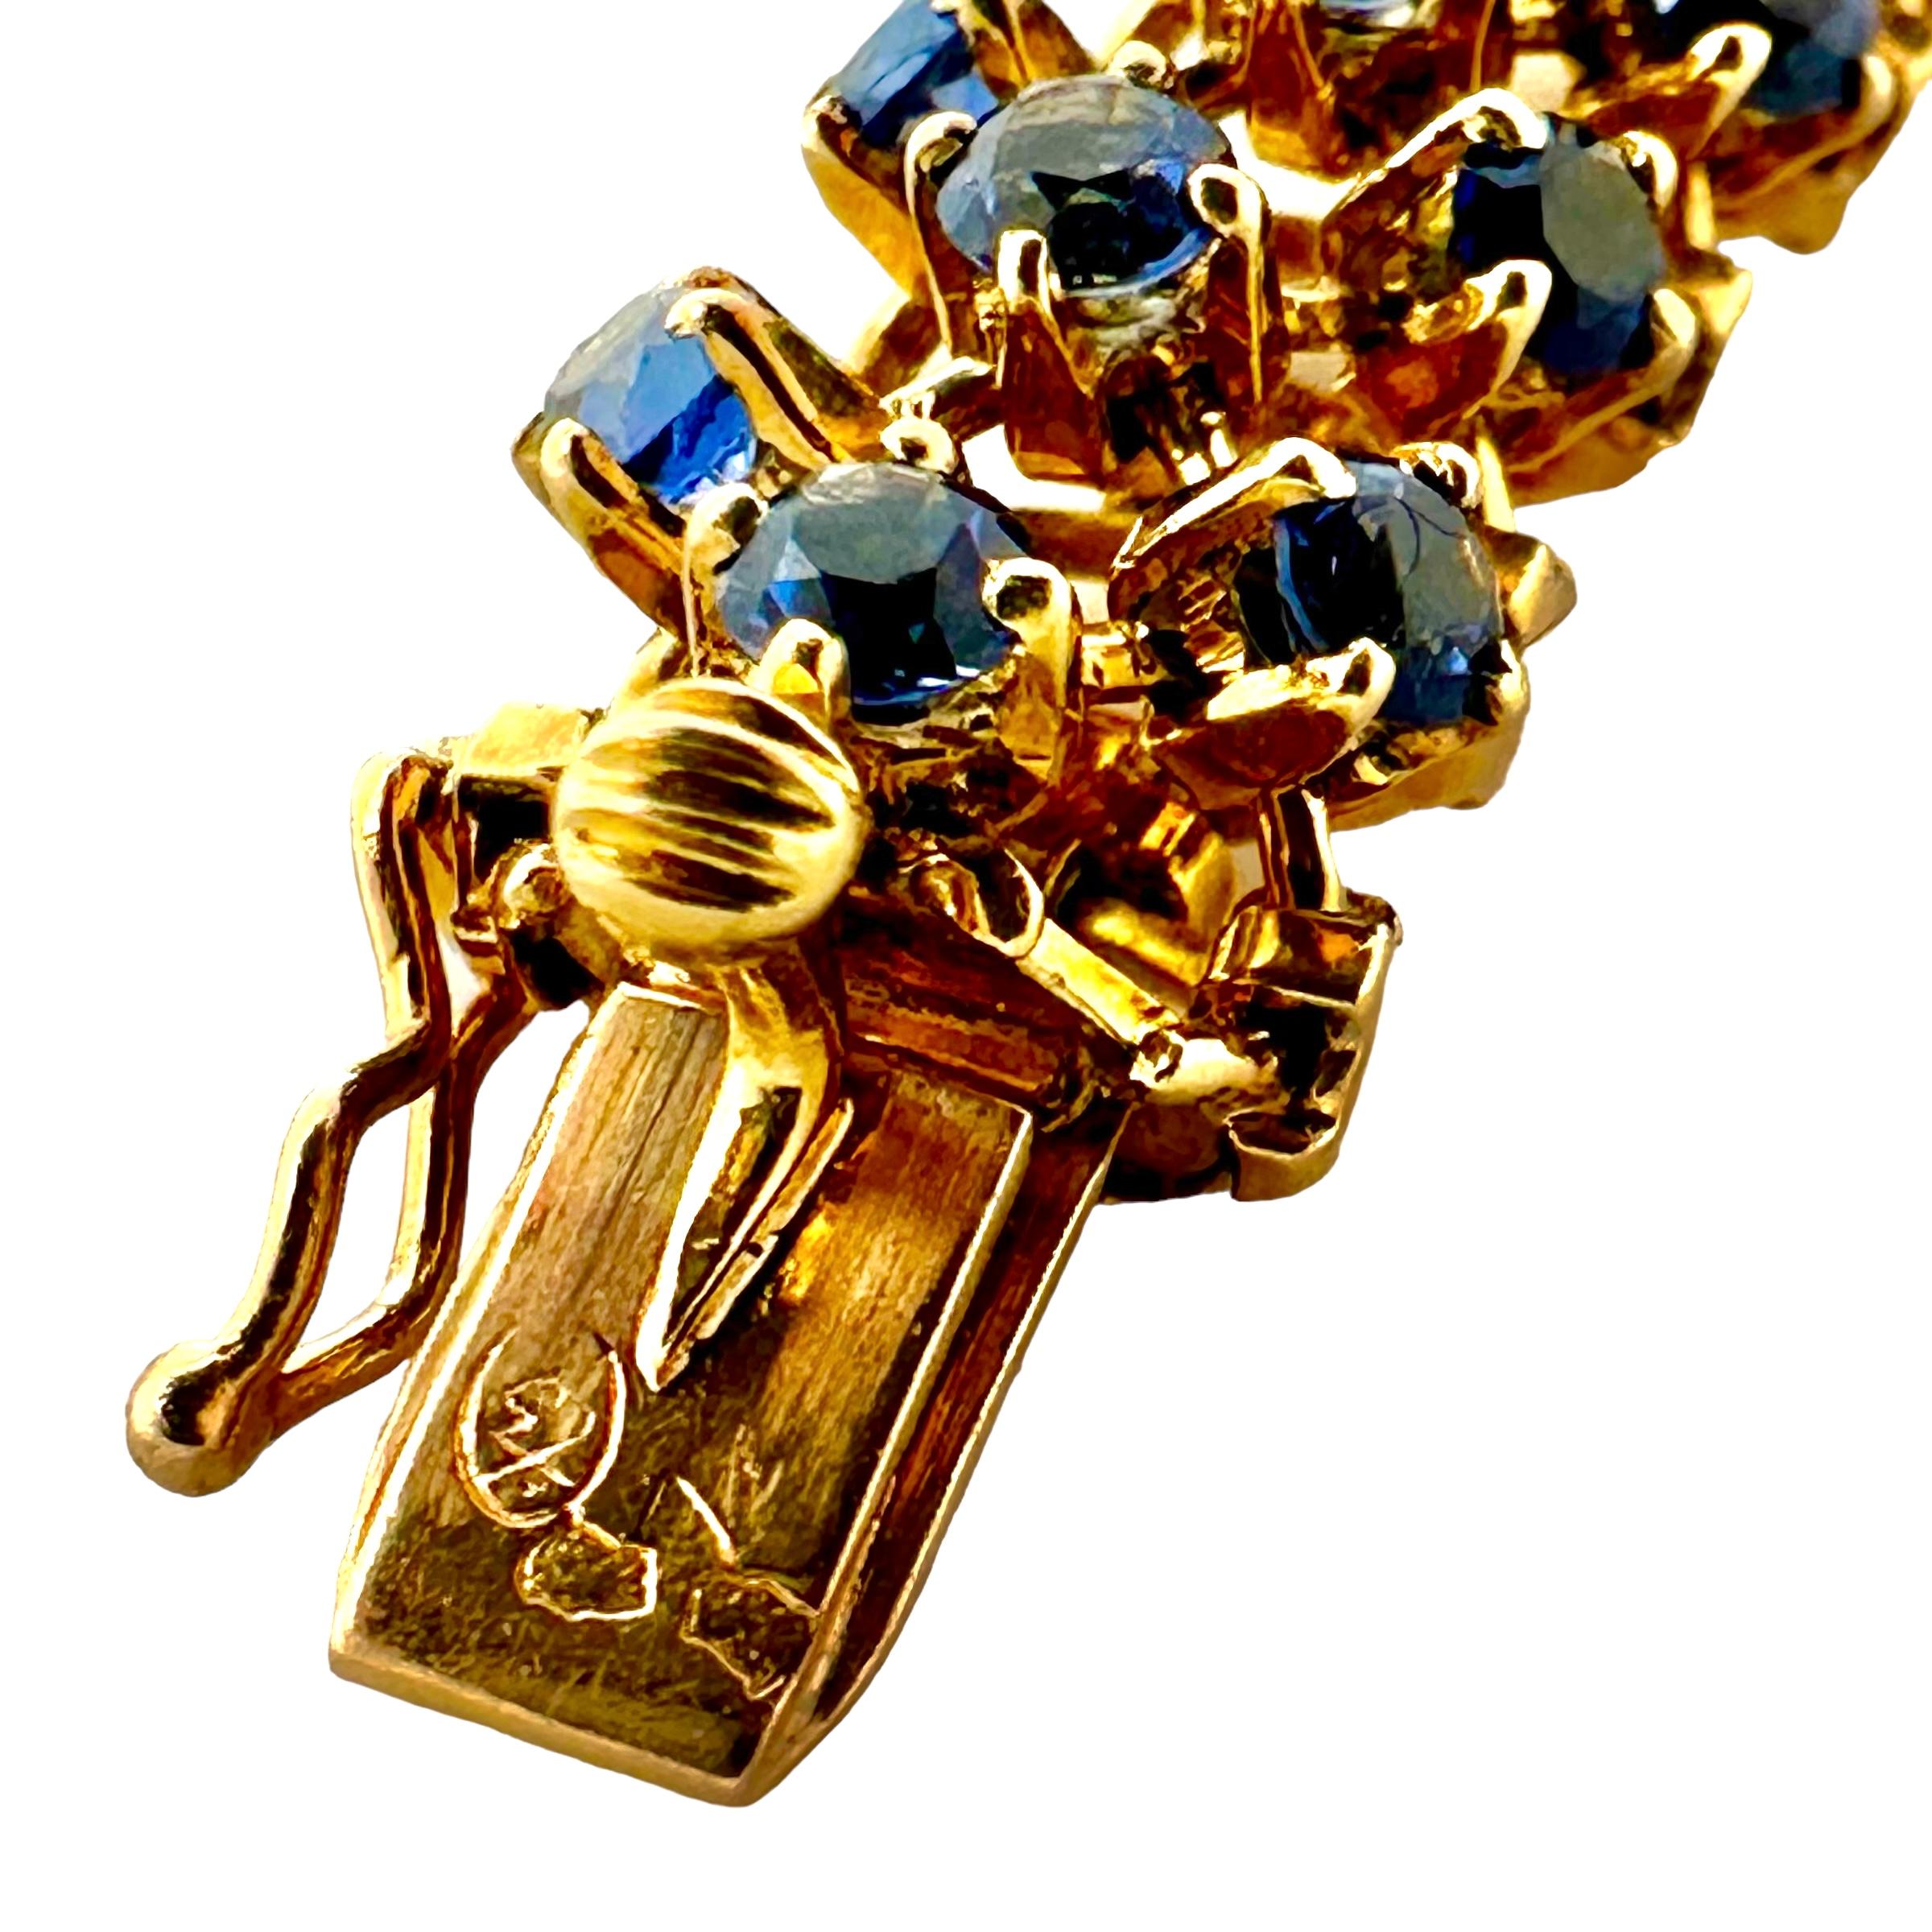 Modern Exquisite Mid-20th Century French 18k Gold and Sapphire Bracelet For Sale